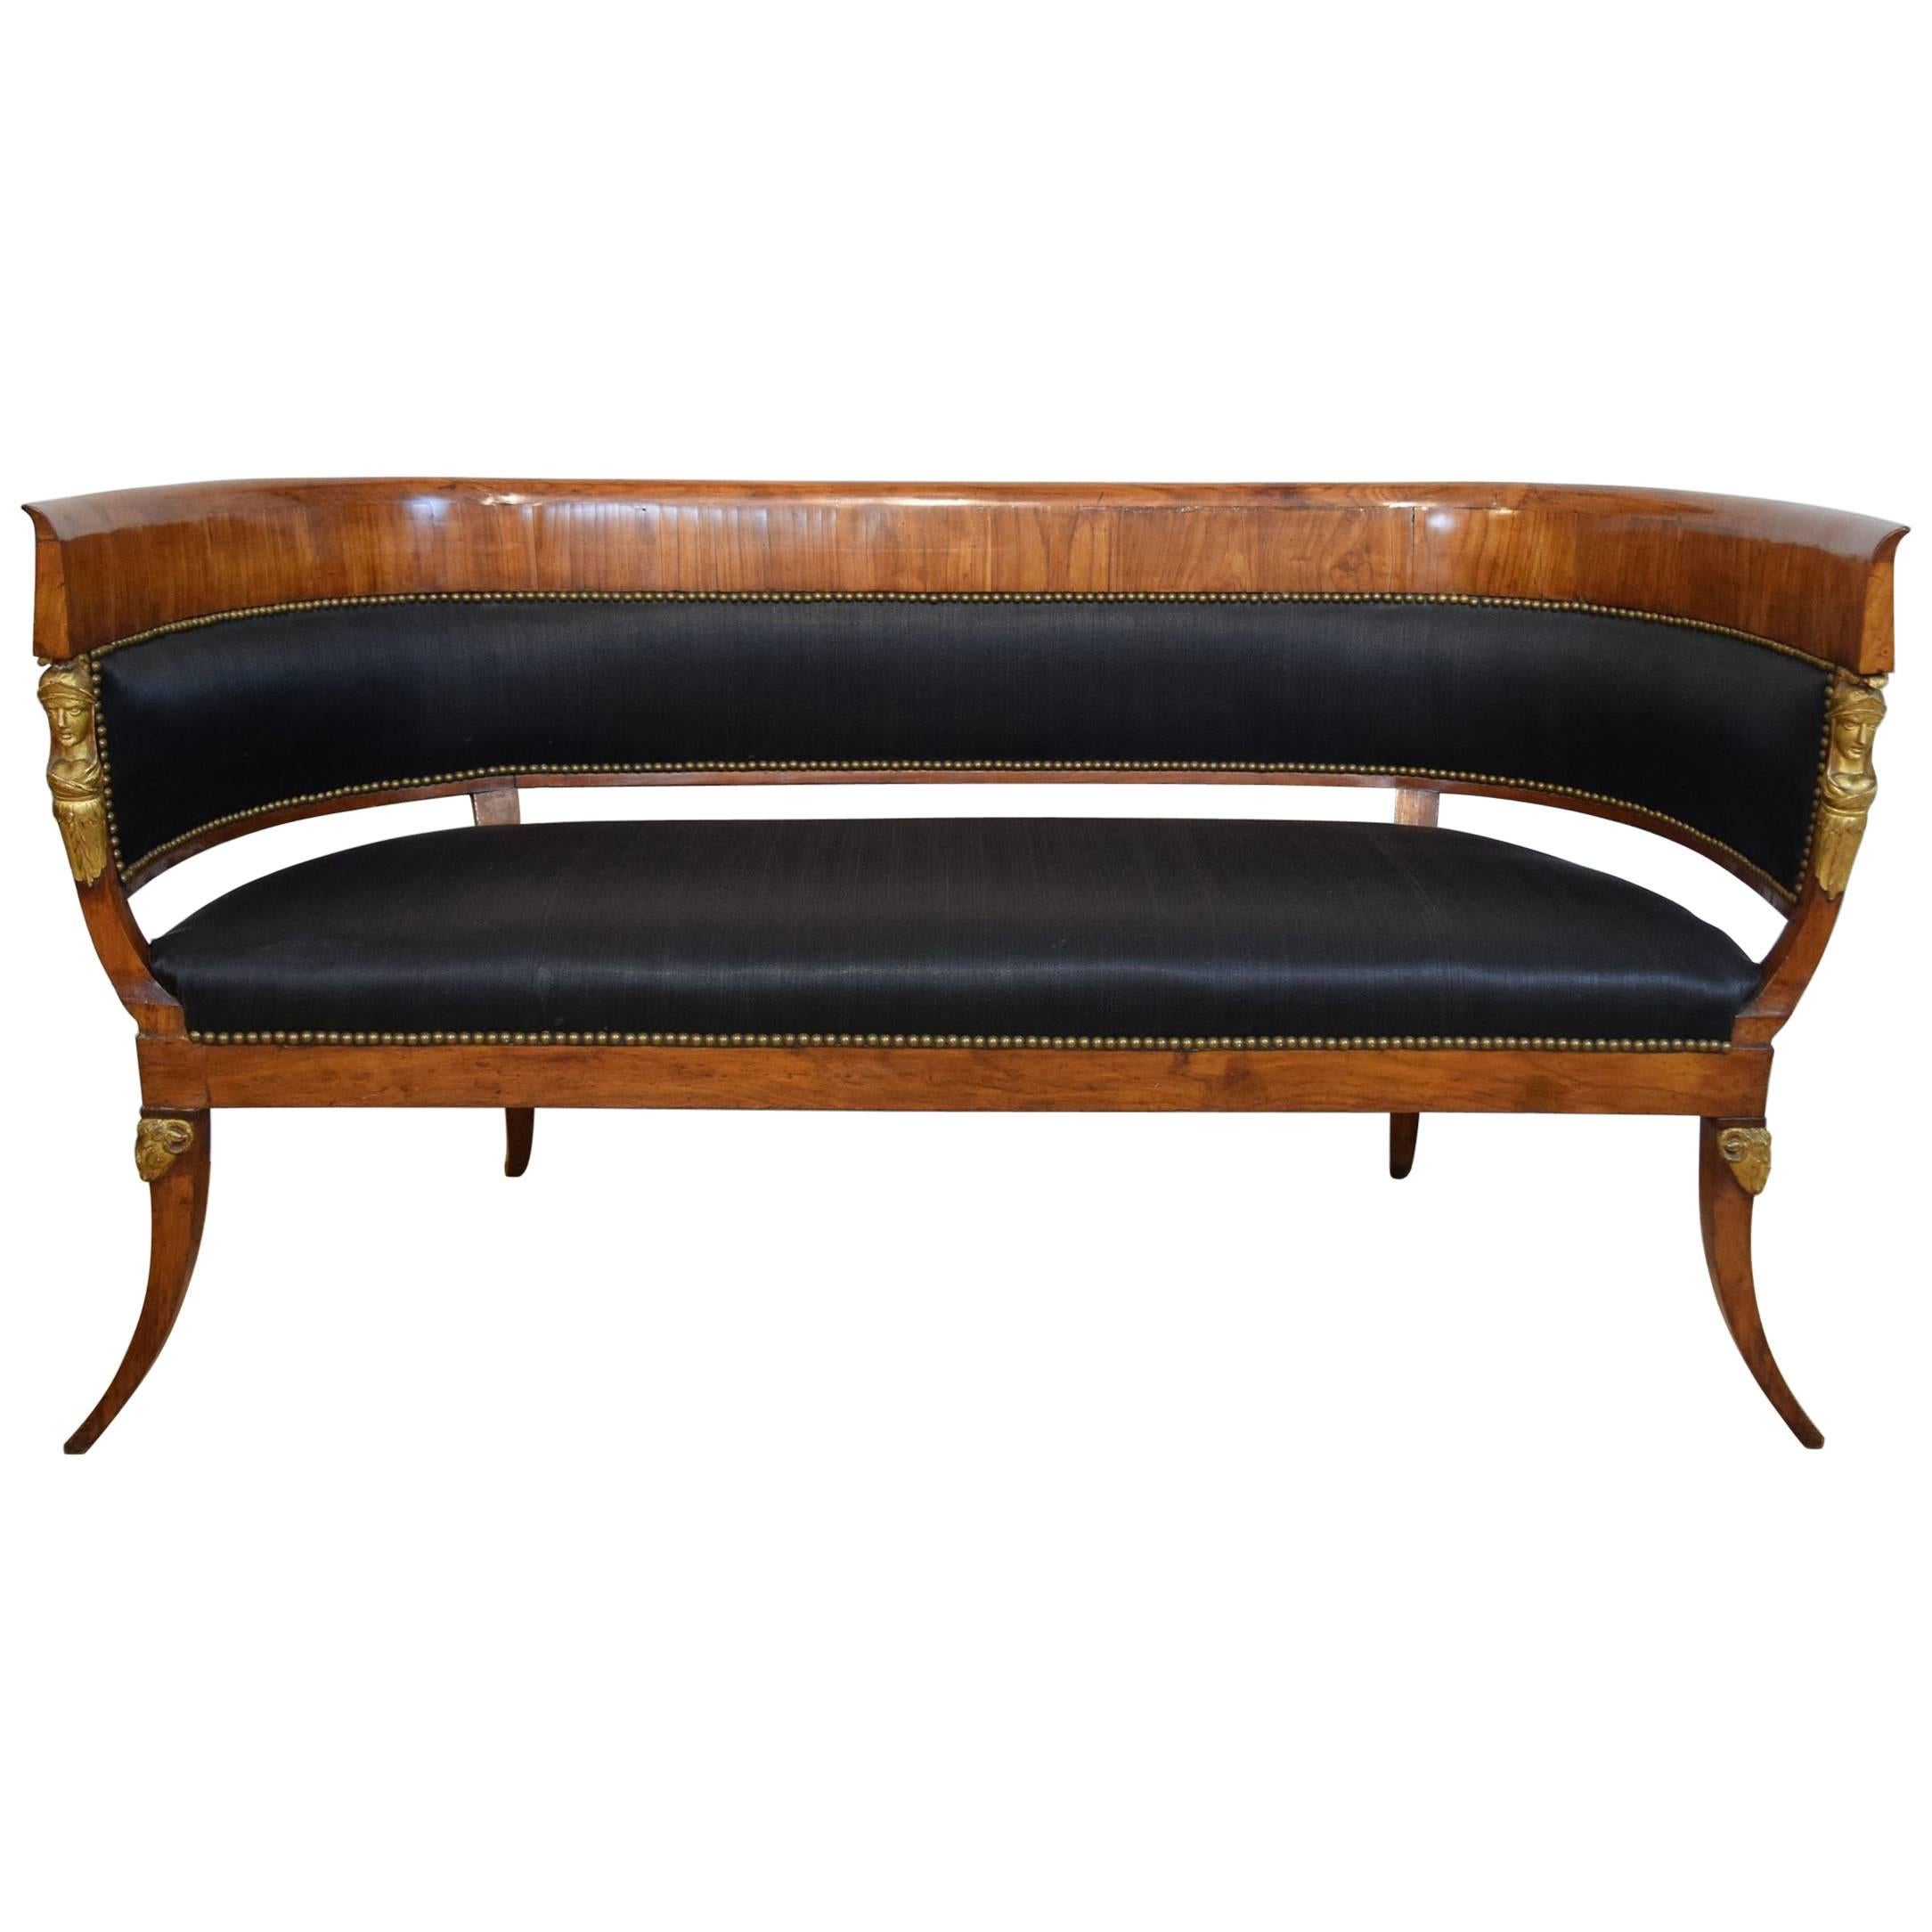 Biedermeier Sofa Owned by Millicent Rogers